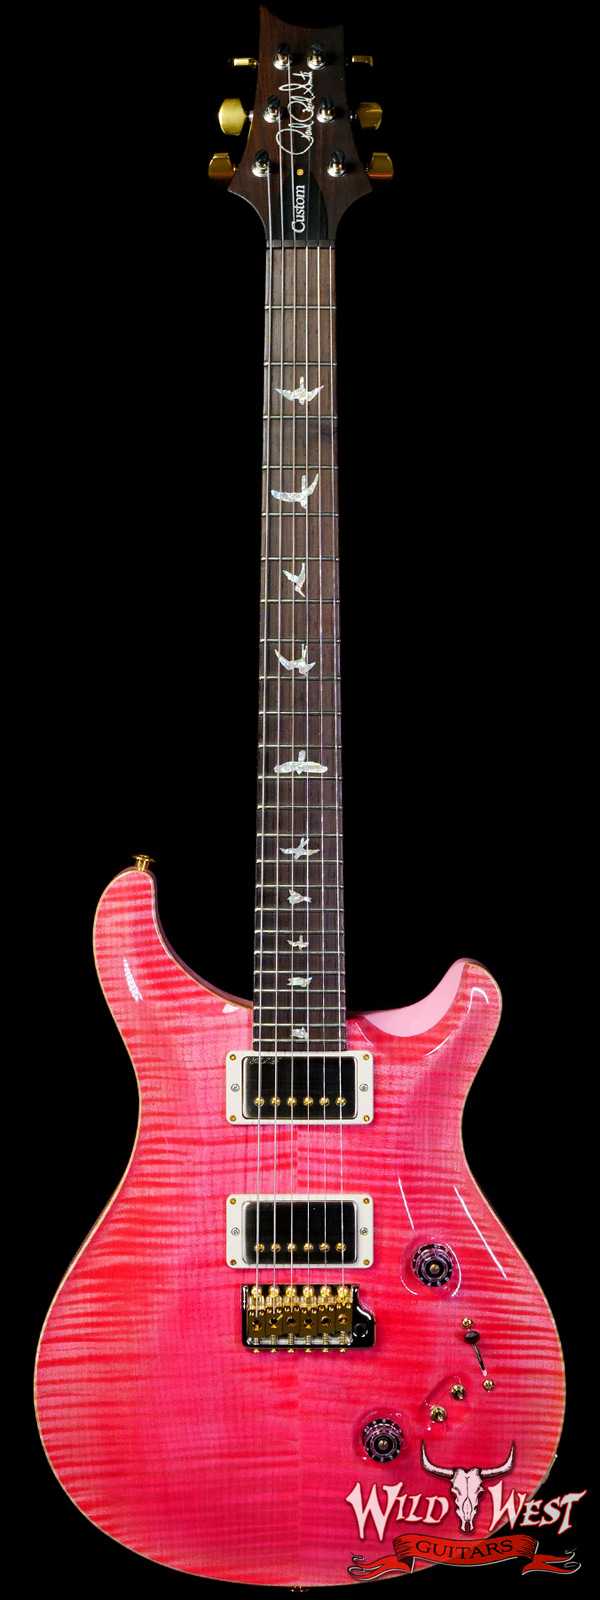 Paul Reed Smith Wood Library 10 Top Custom 24-08 Roasted Flame Maple Neck Brazilian Rosewood Board Bonnie Pink